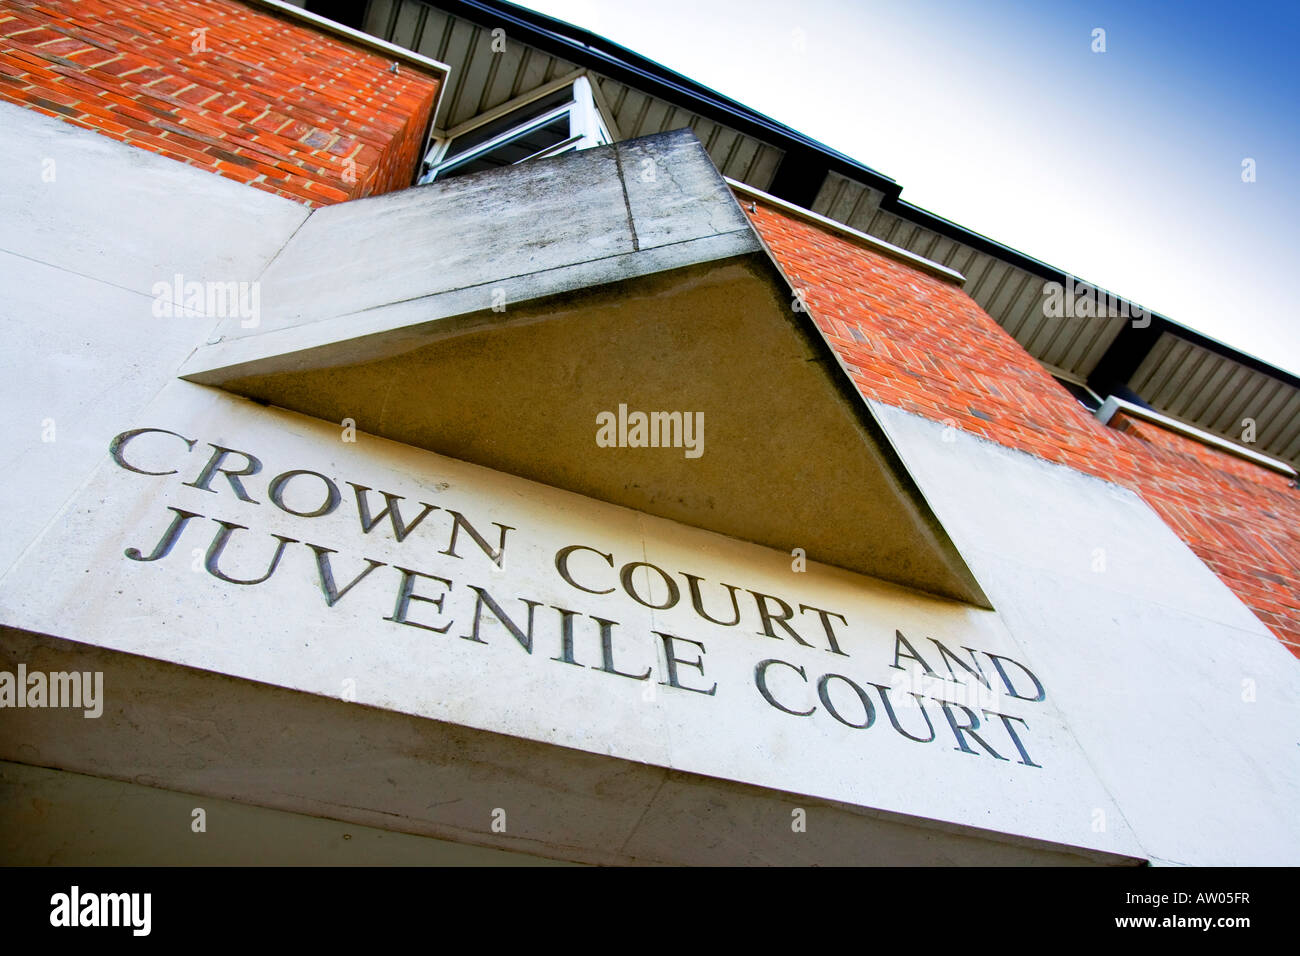 Isle of Wight Crown Court and Juvenile Court building Newport England UK Great Britain Stock Photo